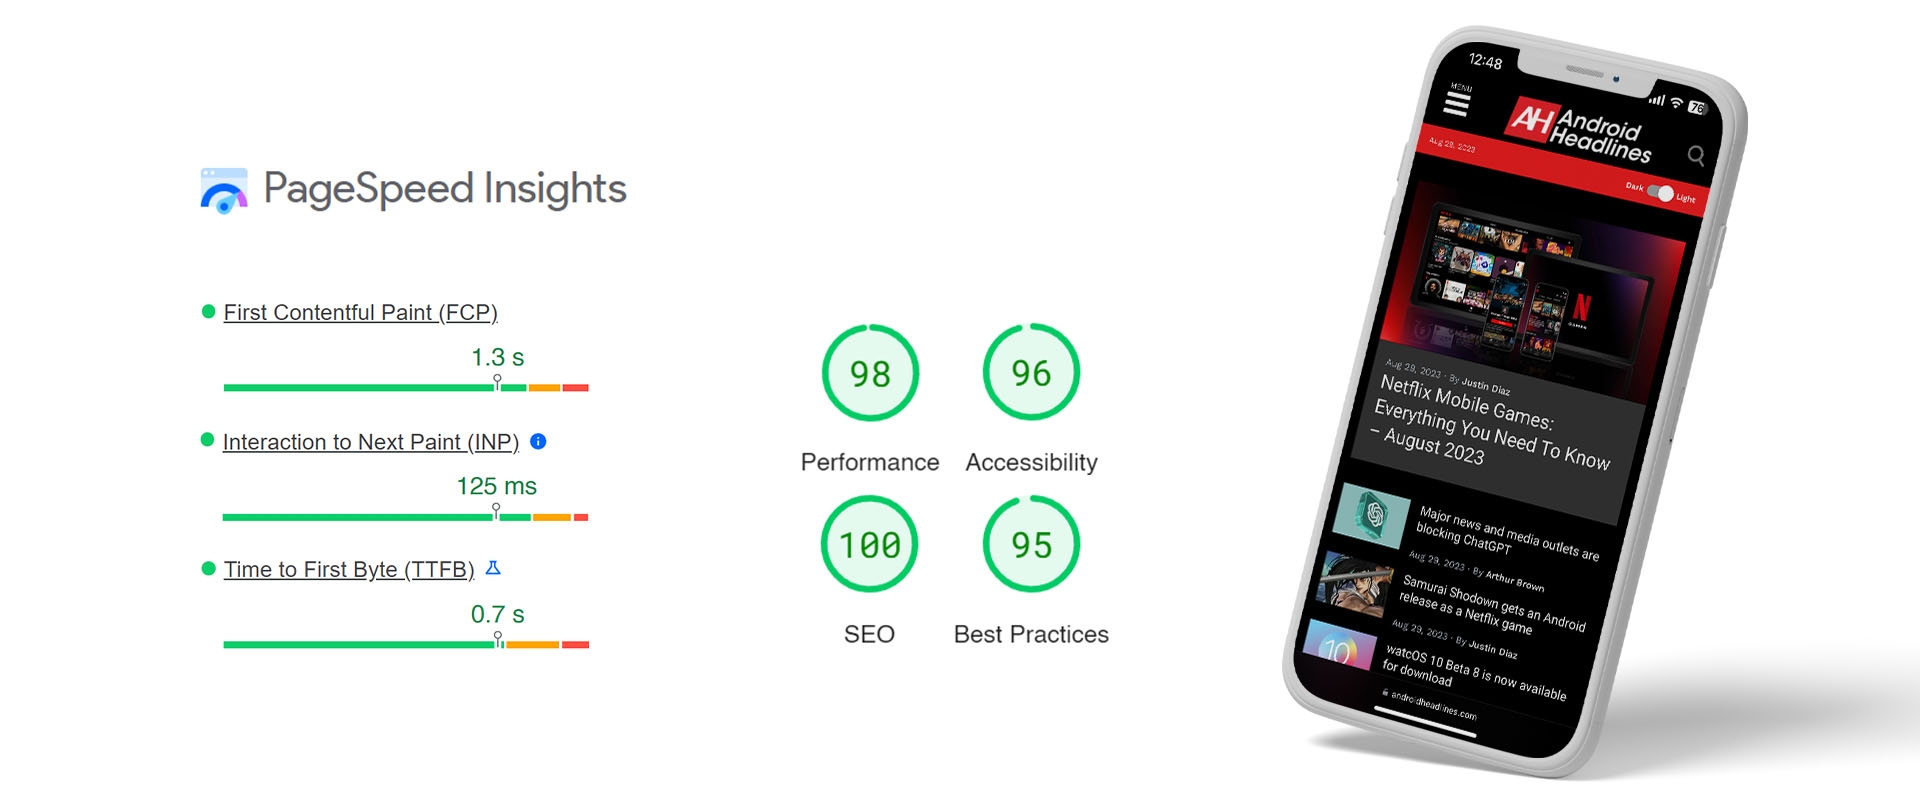 Google PageSpeed Insights scorecard displaying high performance metrics for a website, with scores of 98 for performance, 96 for accessibility, 100 for SEO, and 95 for best practices, alongside a smartphone showing the responsive view of a news website, illustrating the site's effective optimization and user-friendly interface.